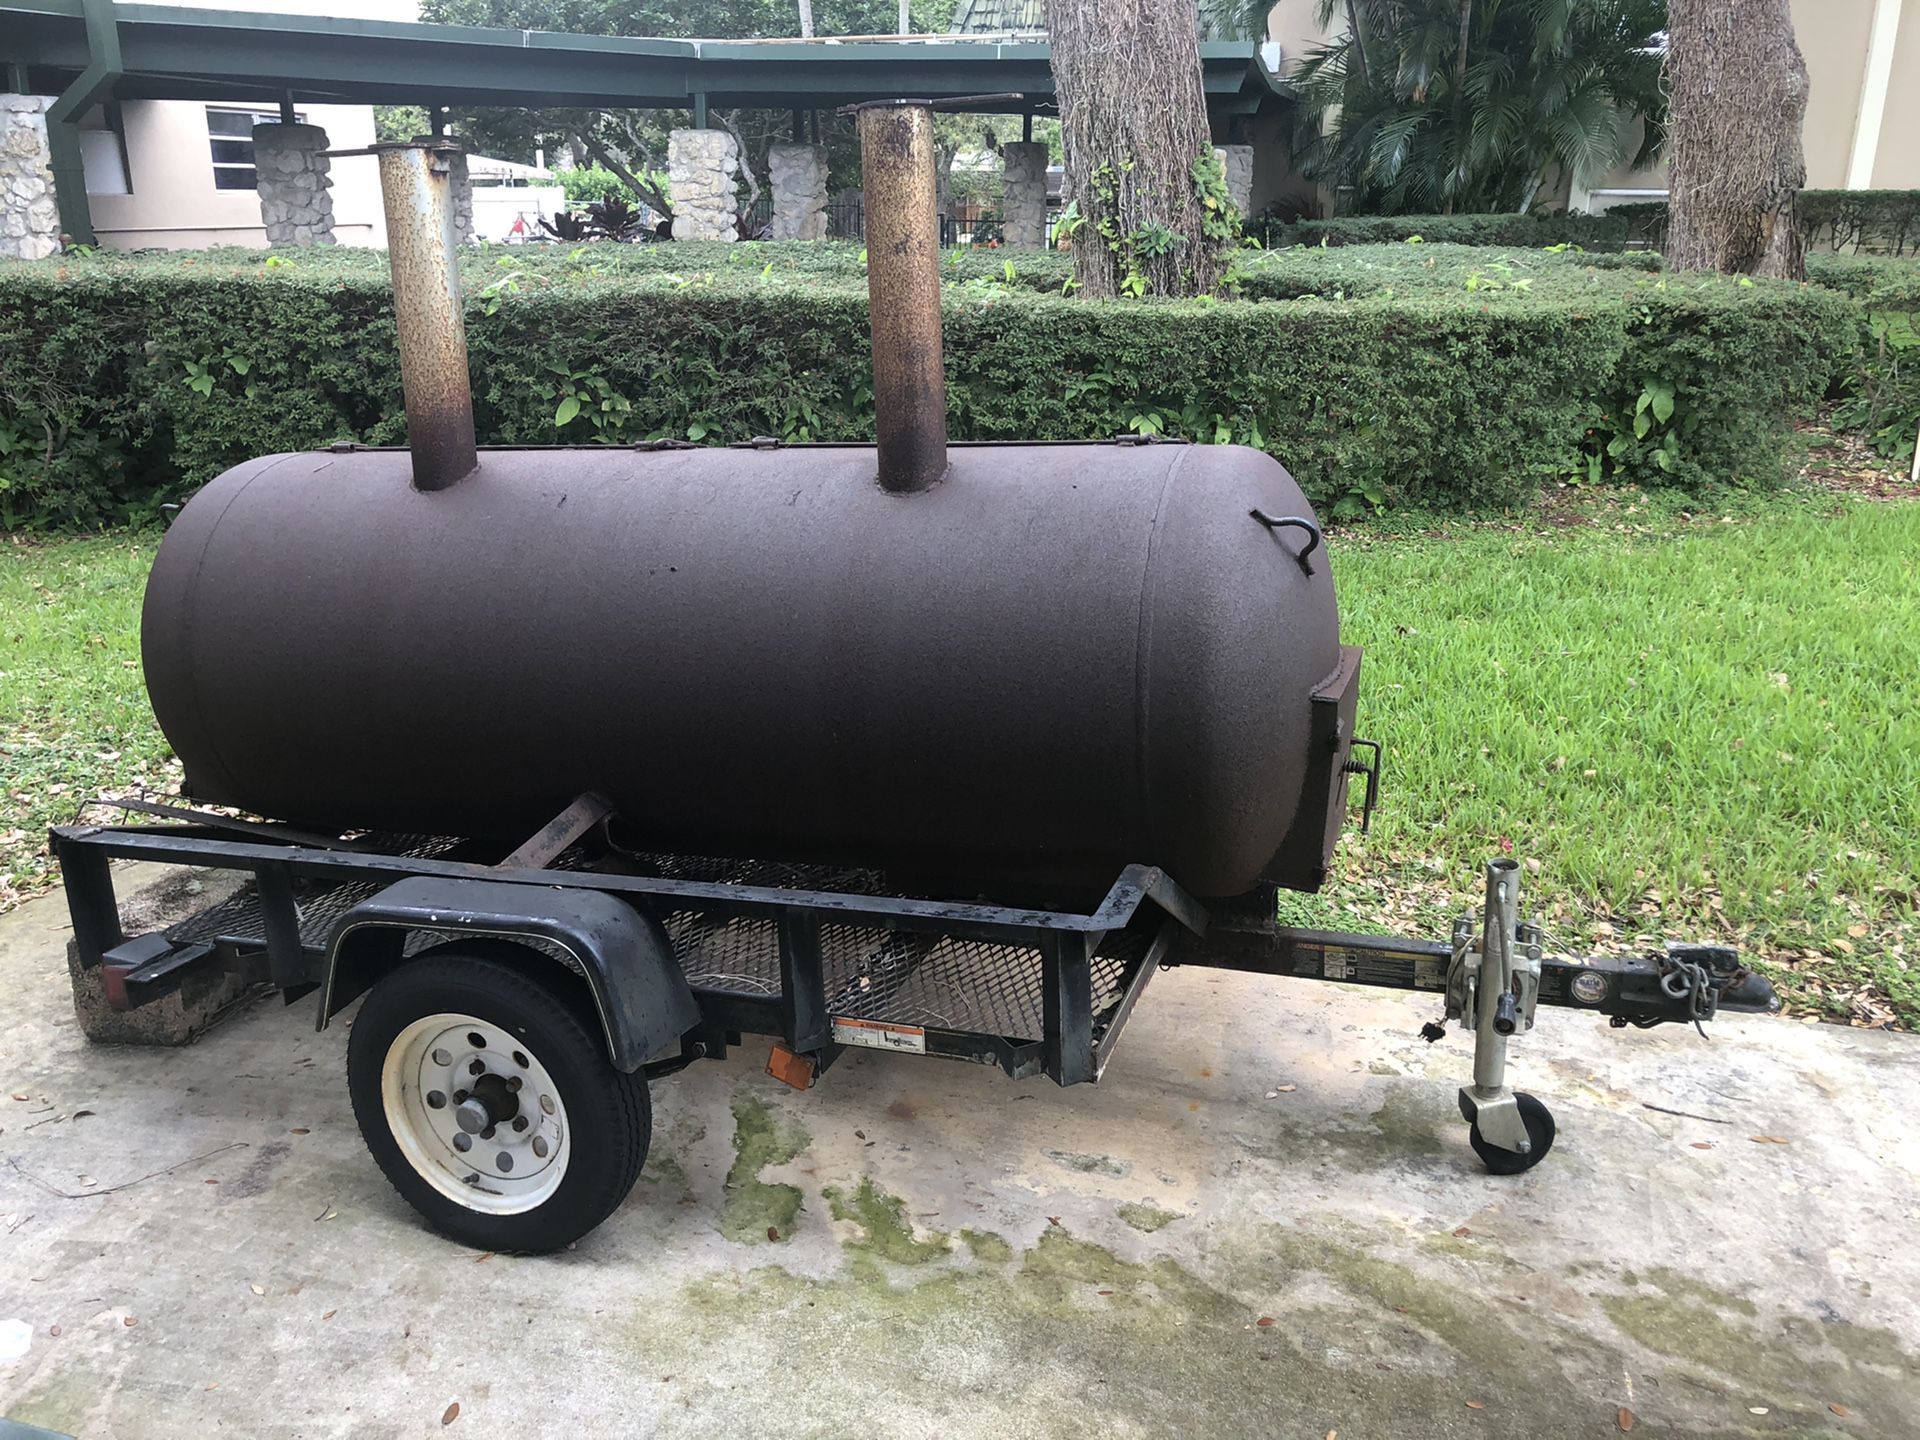 Grill on trailer